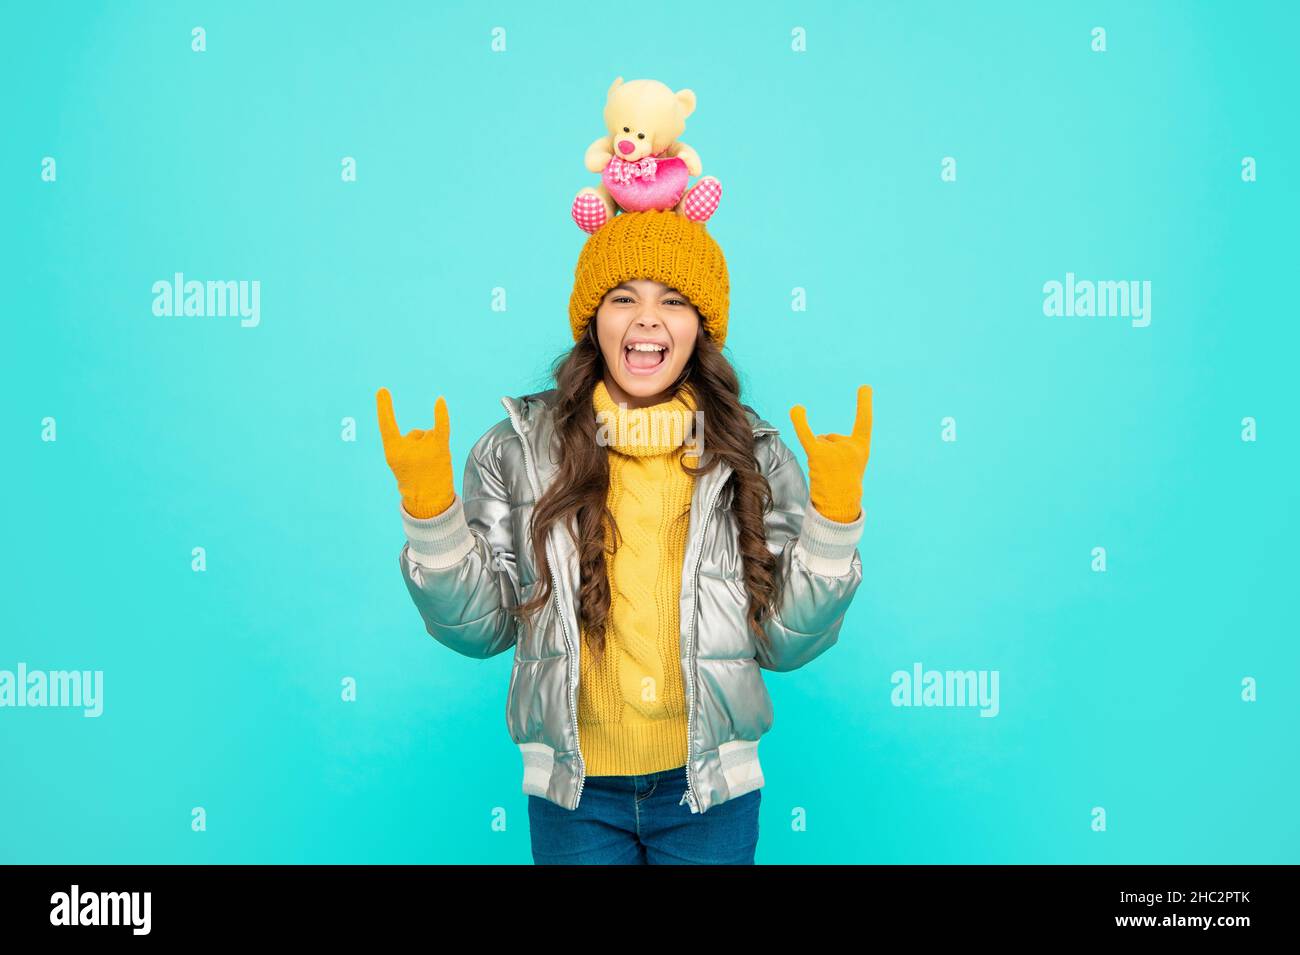 childhood. teen girl hold toy bear. child wearing warm clothes on blue background. Stock Photo